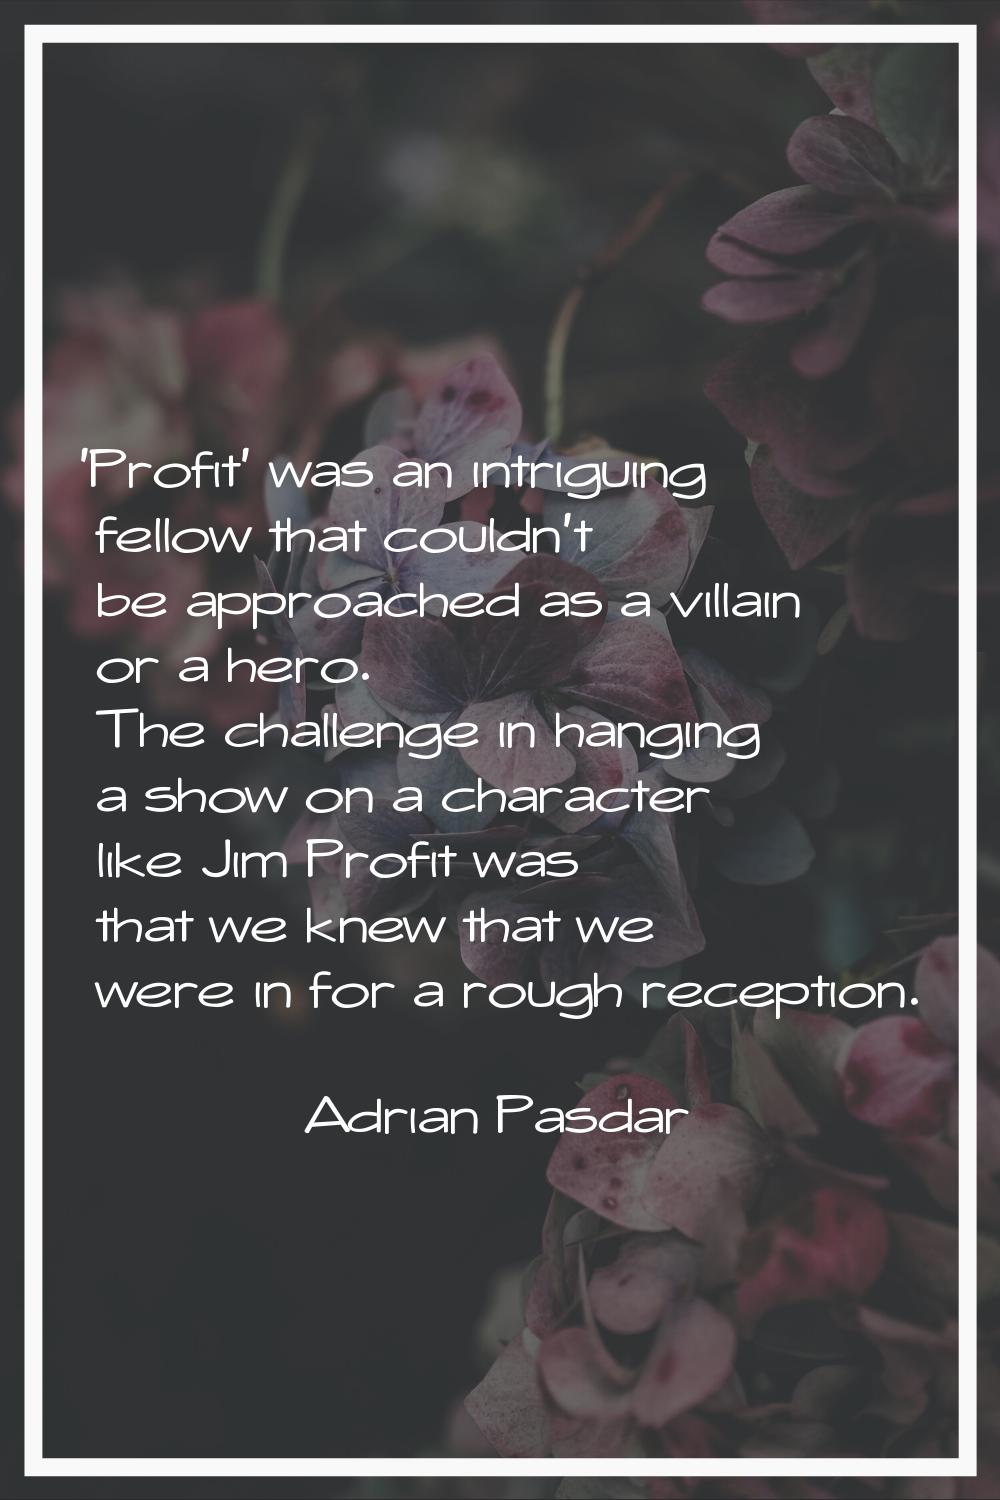 'Profit' was an intriguing fellow that couldn't be approached as a villain or a hero. The challenge